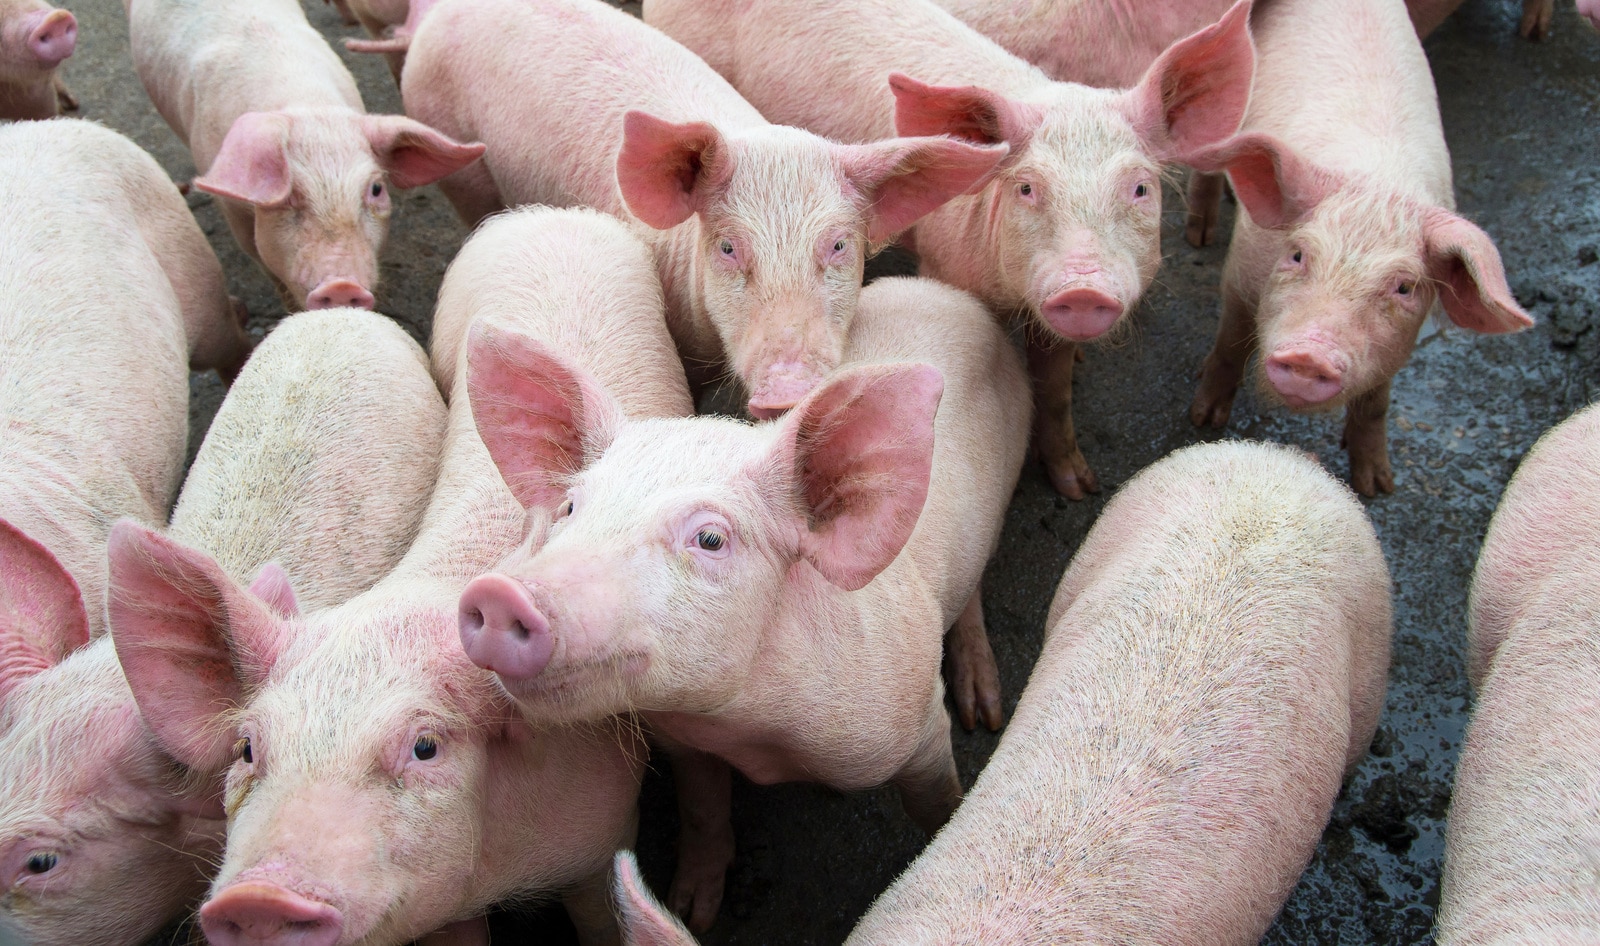 COVID-19 Virus Survives on Chicken, Salmon, and Pork for 21 Days, Report Finds